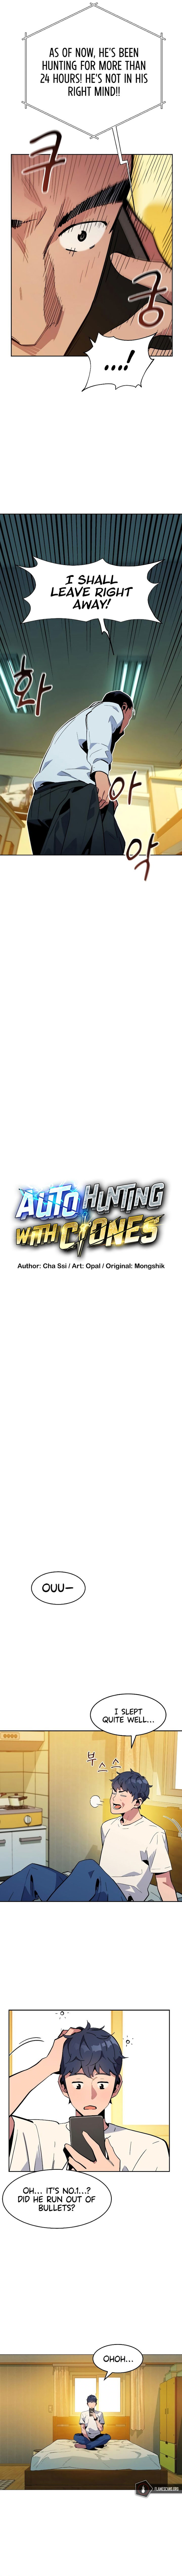 auto-hunting-with-clones-chap-11-2